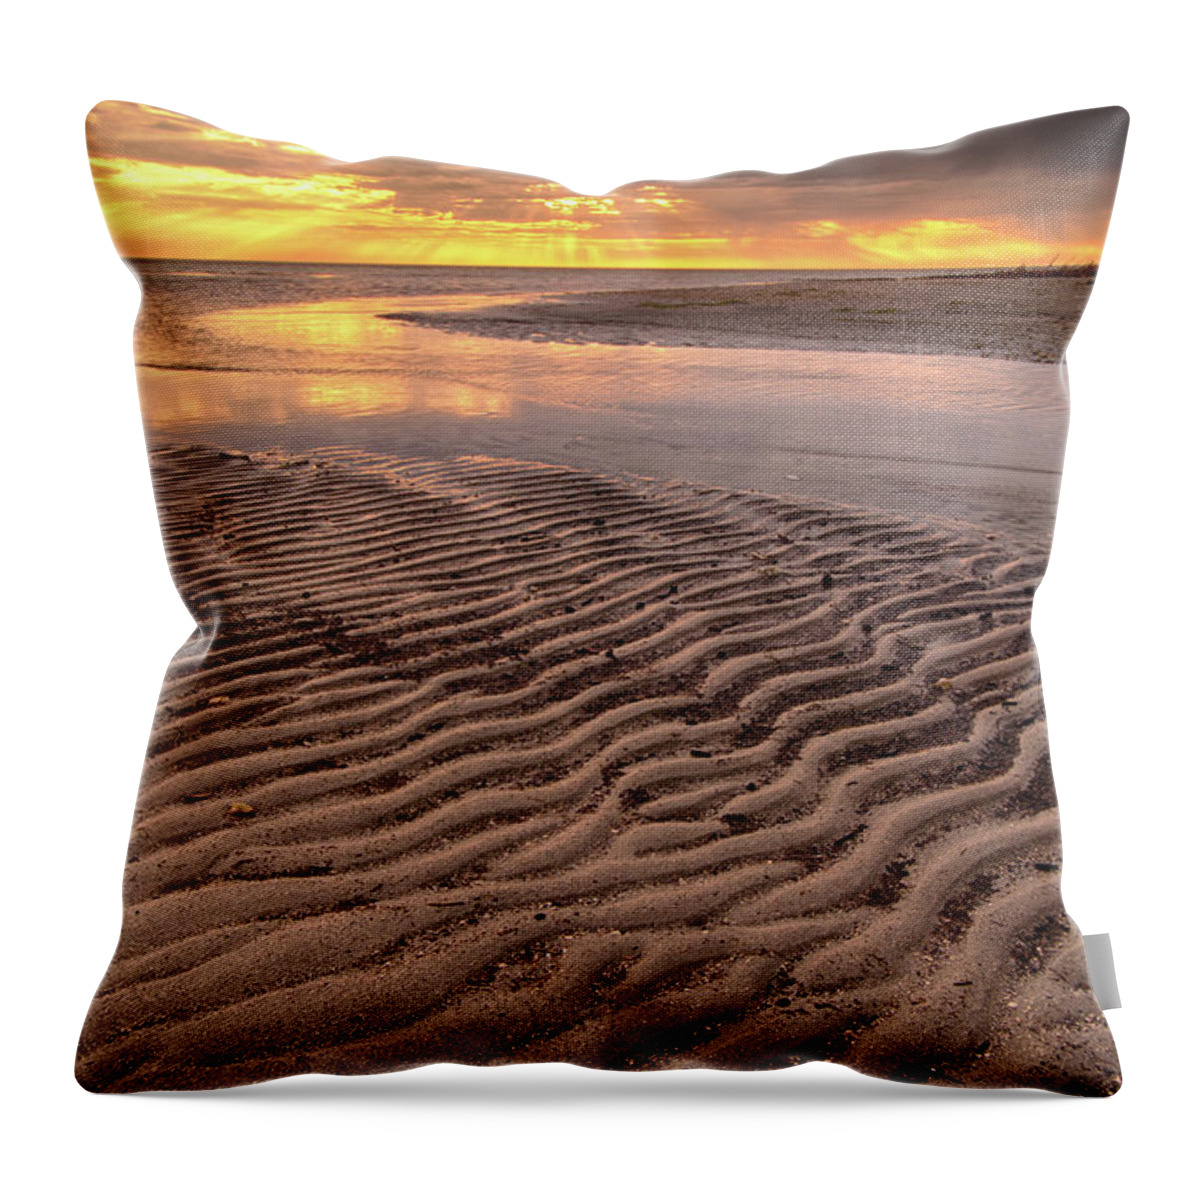 Tranquility Throw Pillow featuring the photograph Leading Lines by Nebojsa Novakovic